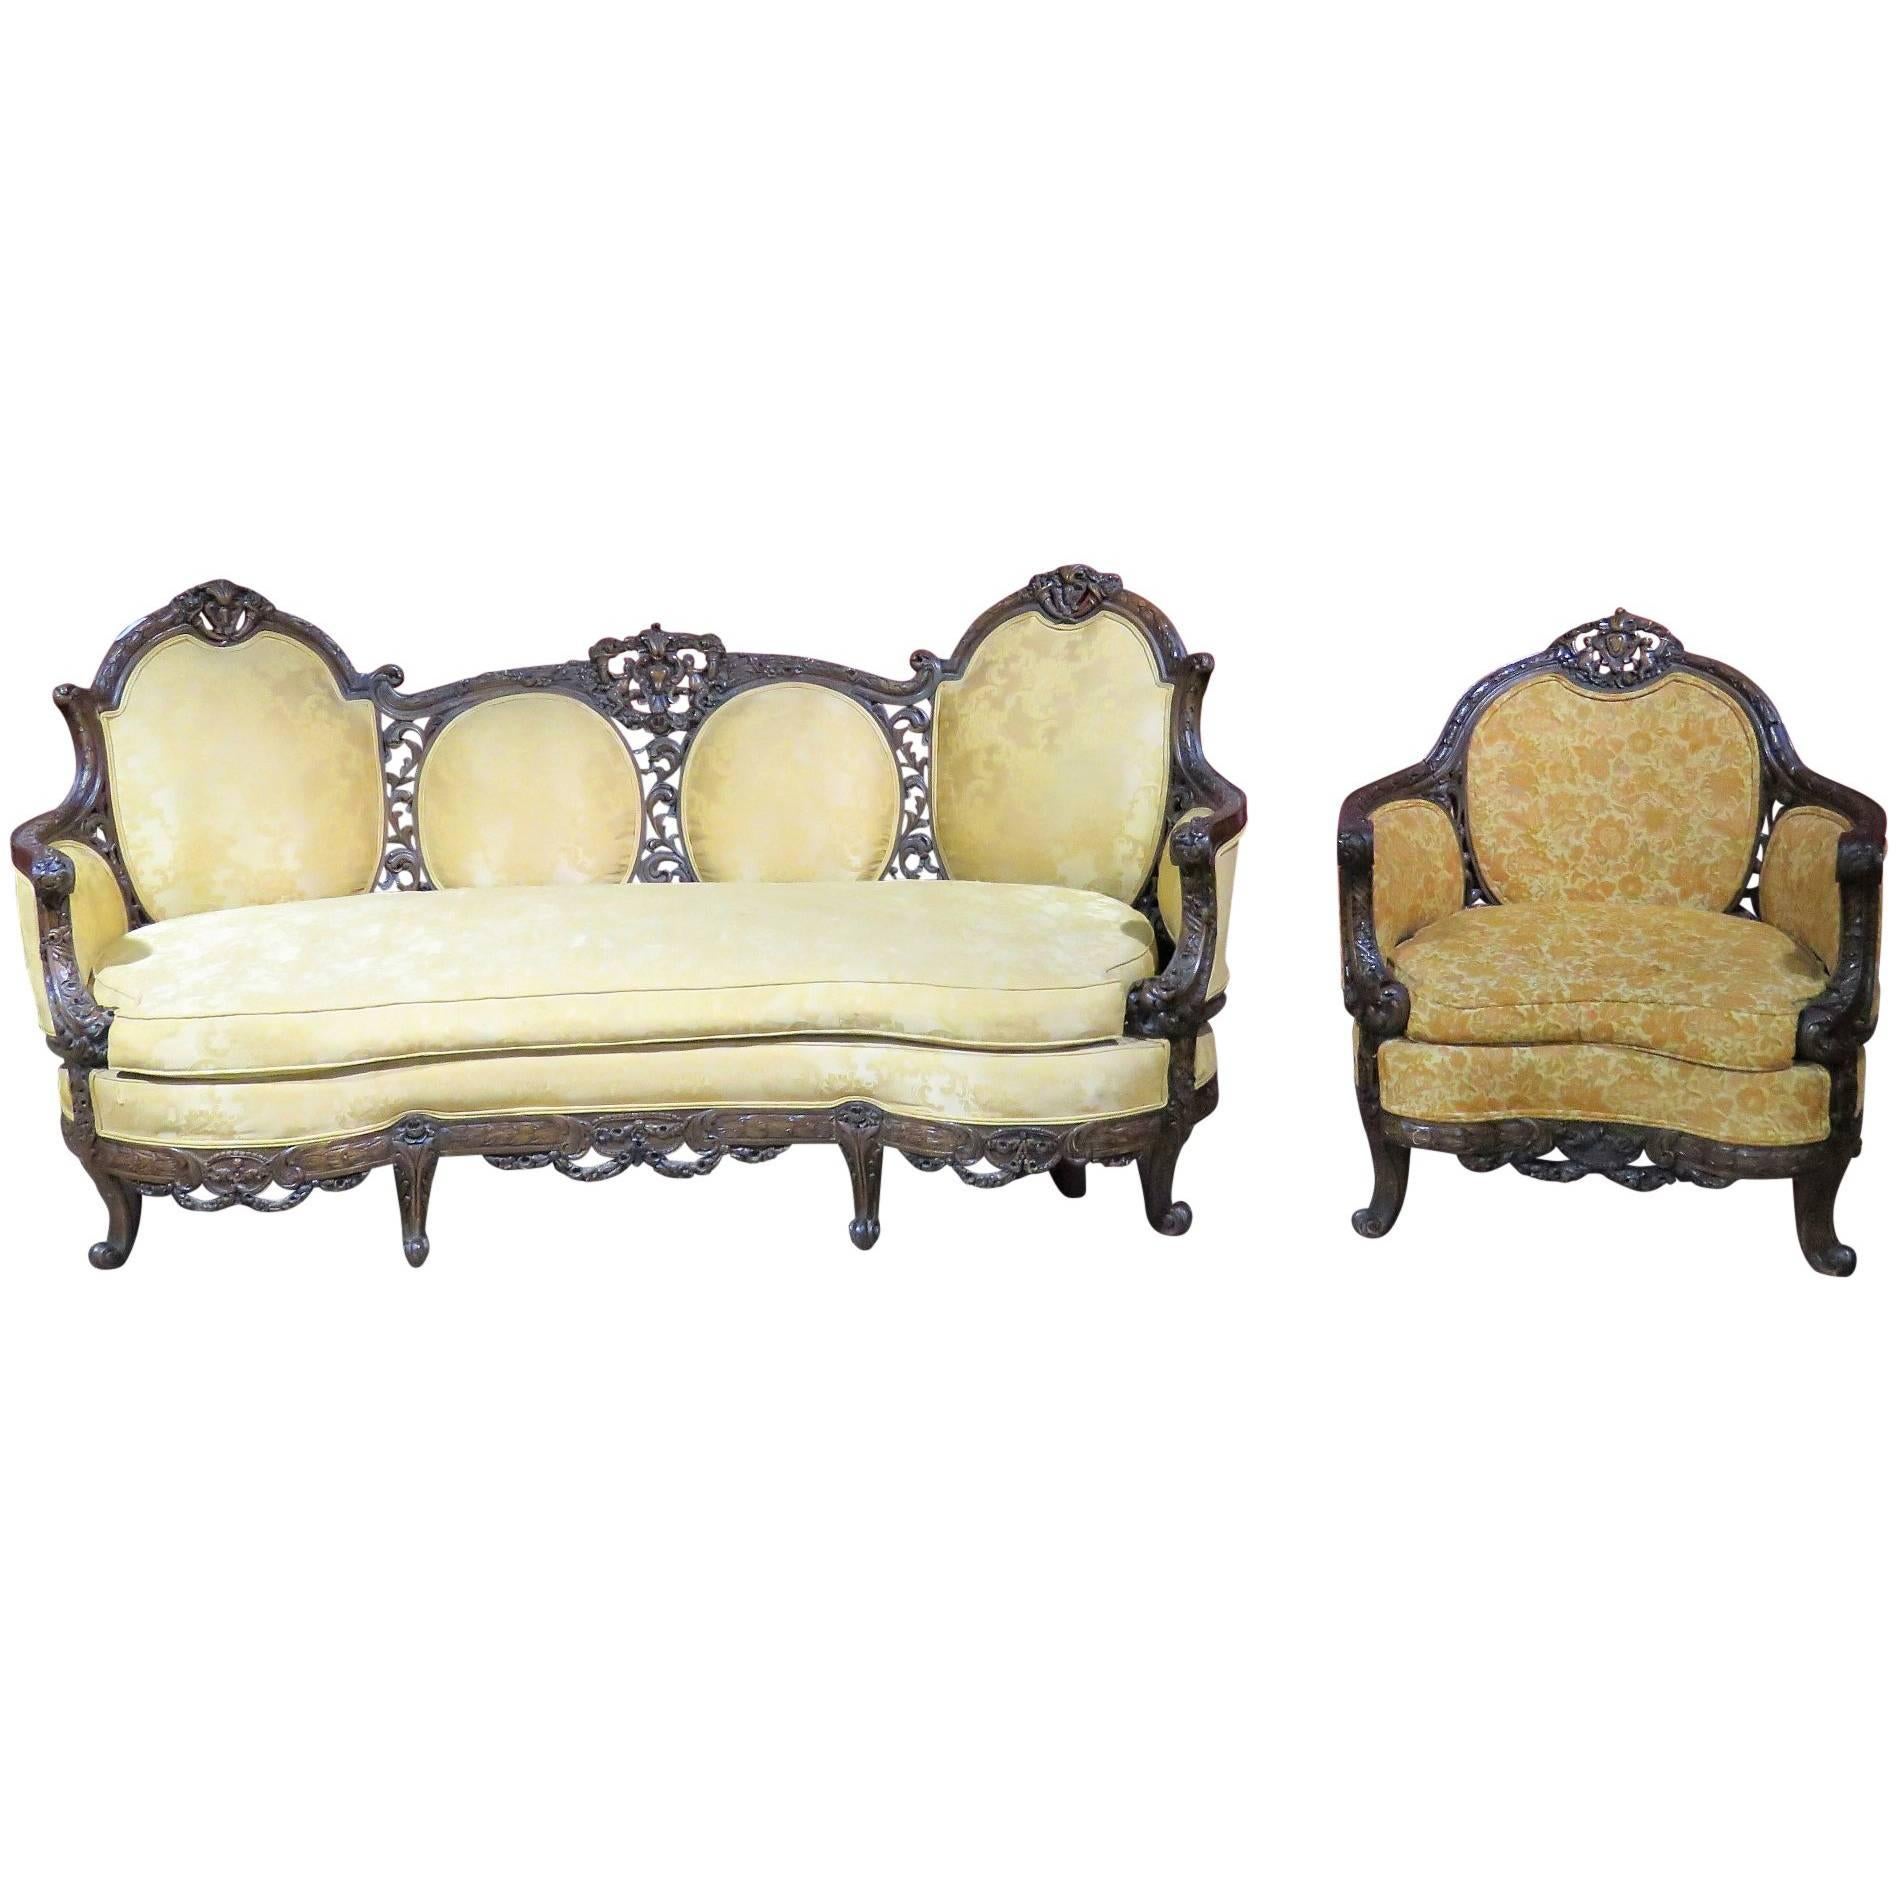 R.J. Horner Style Carved Walnut Settee and Bergere